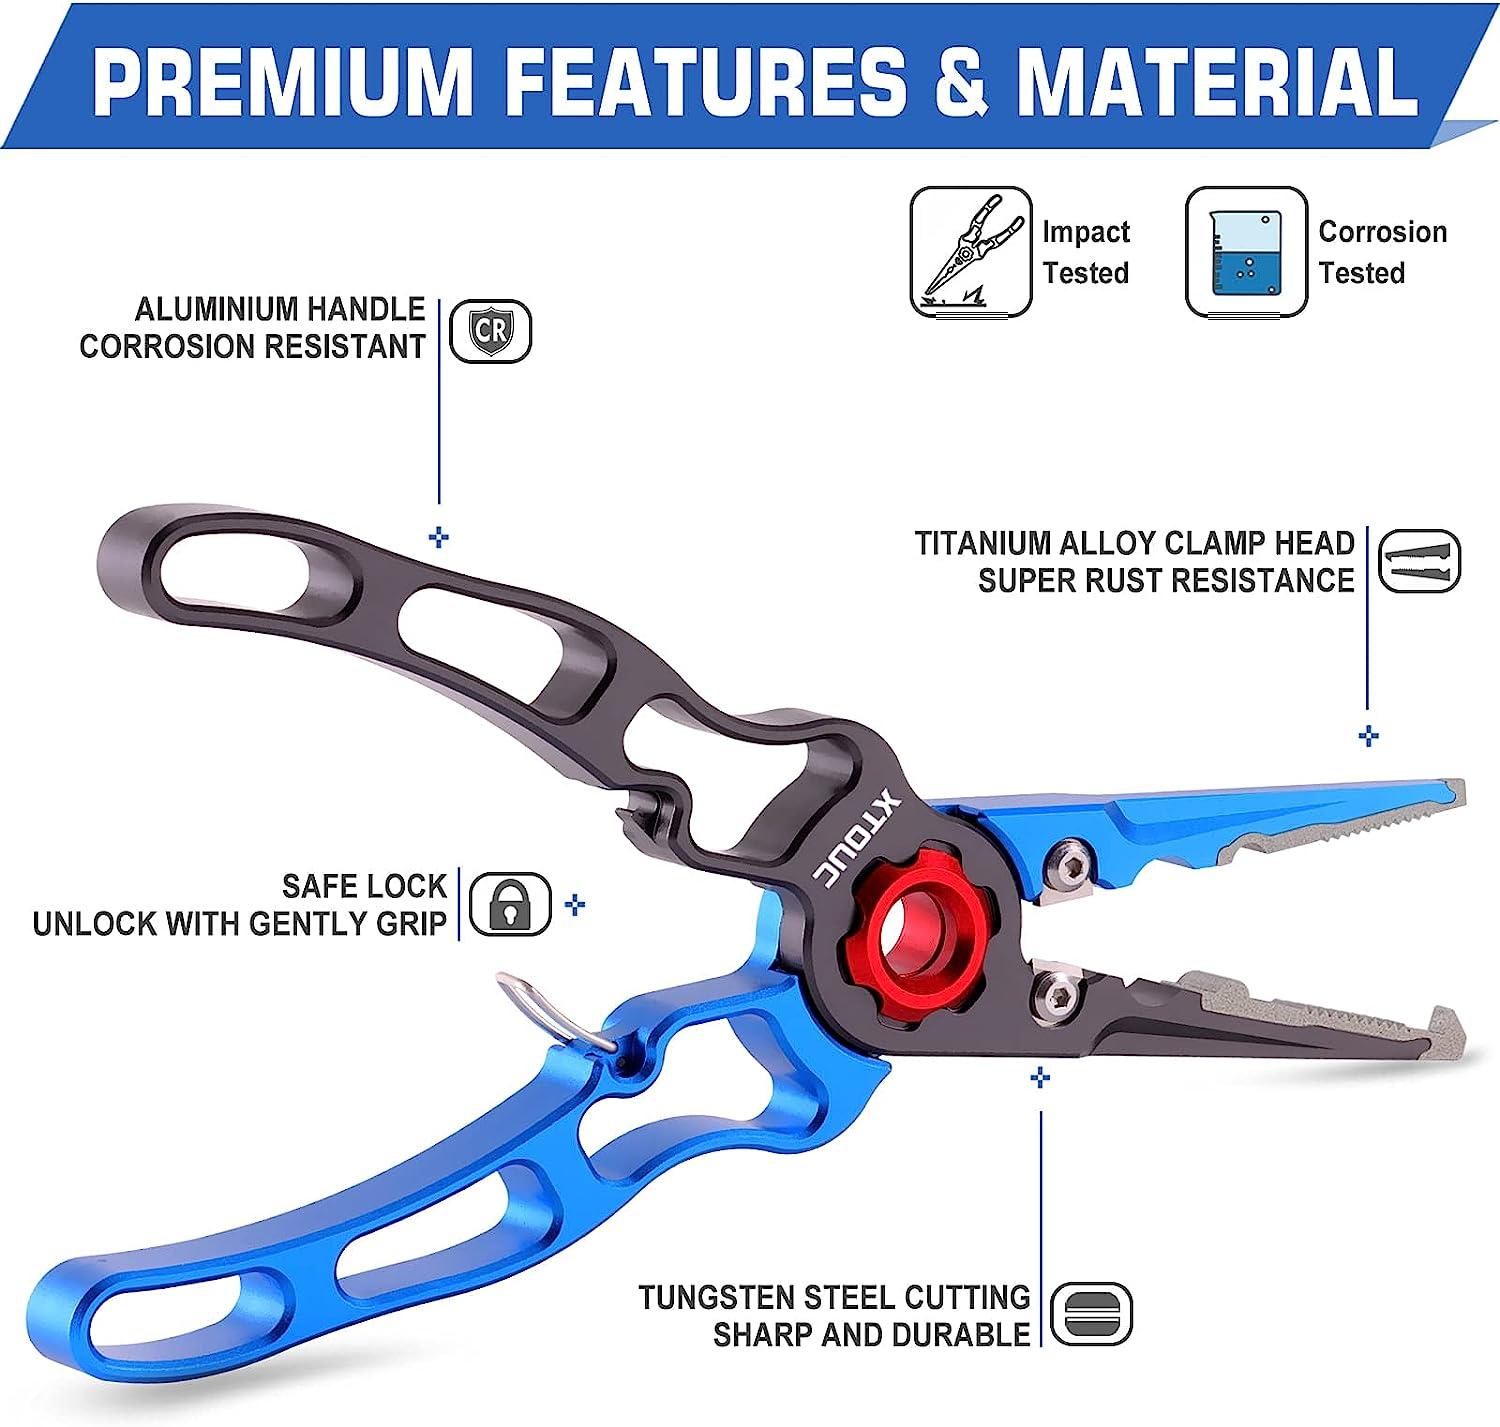 XTOUC Fishing Pliers, Titanium Alloy Clamp Head Fishing Gear,Saltwater  Resistant Fishing Tools, Hook Remover Braid Line Cutting and Split Ring  Pliers, with Sheath and Lanyard Blue&gray